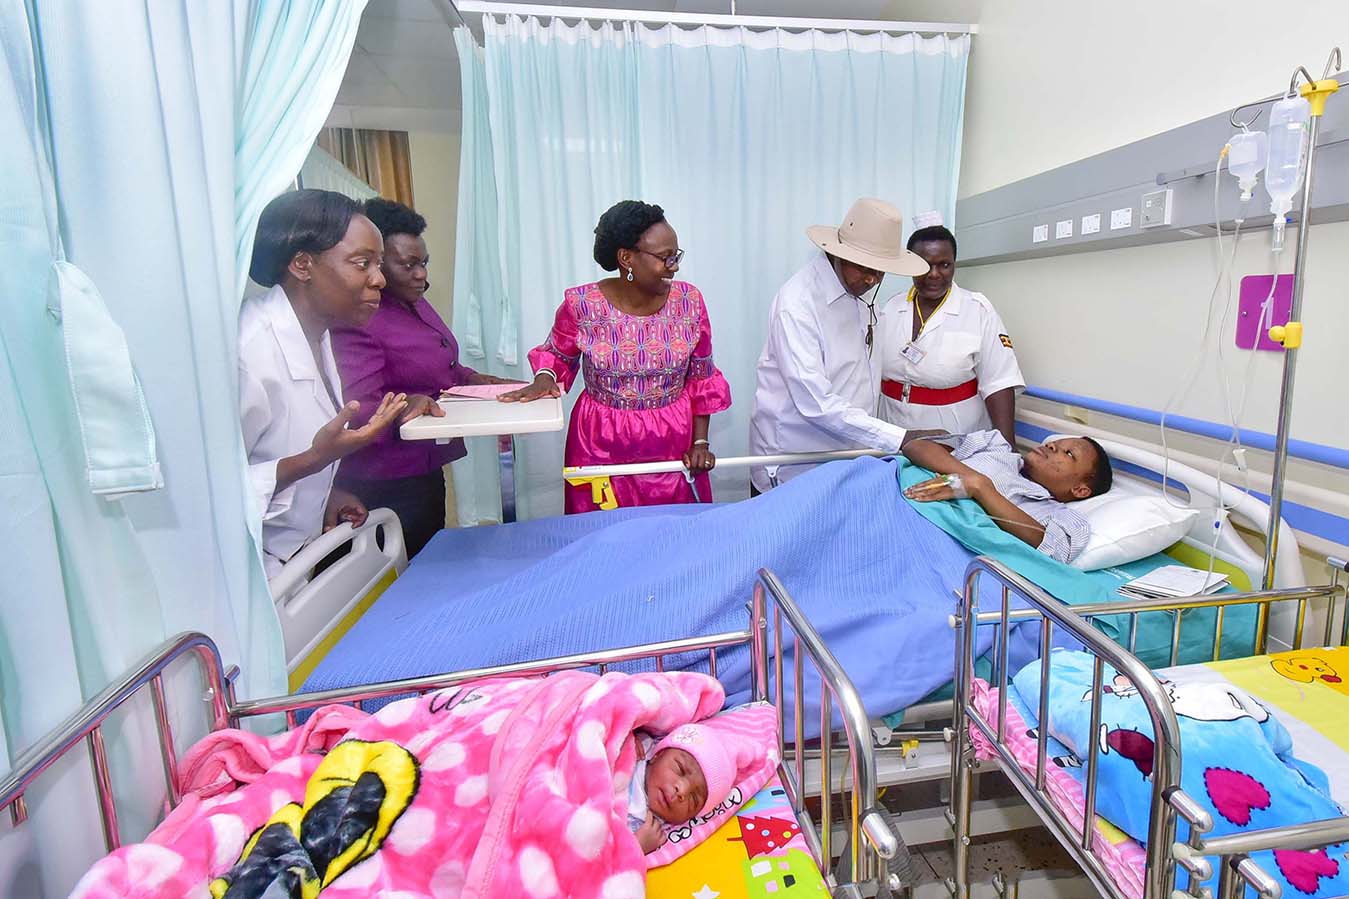 President Yoweri Kaguta Museveni together with health Ministers Ruth Acheng and Sarah Opendi among other health officials and hospital staff interacting with one of the new mothers , Angella Nalukenge while inspecting some of the facilities of the New Mul